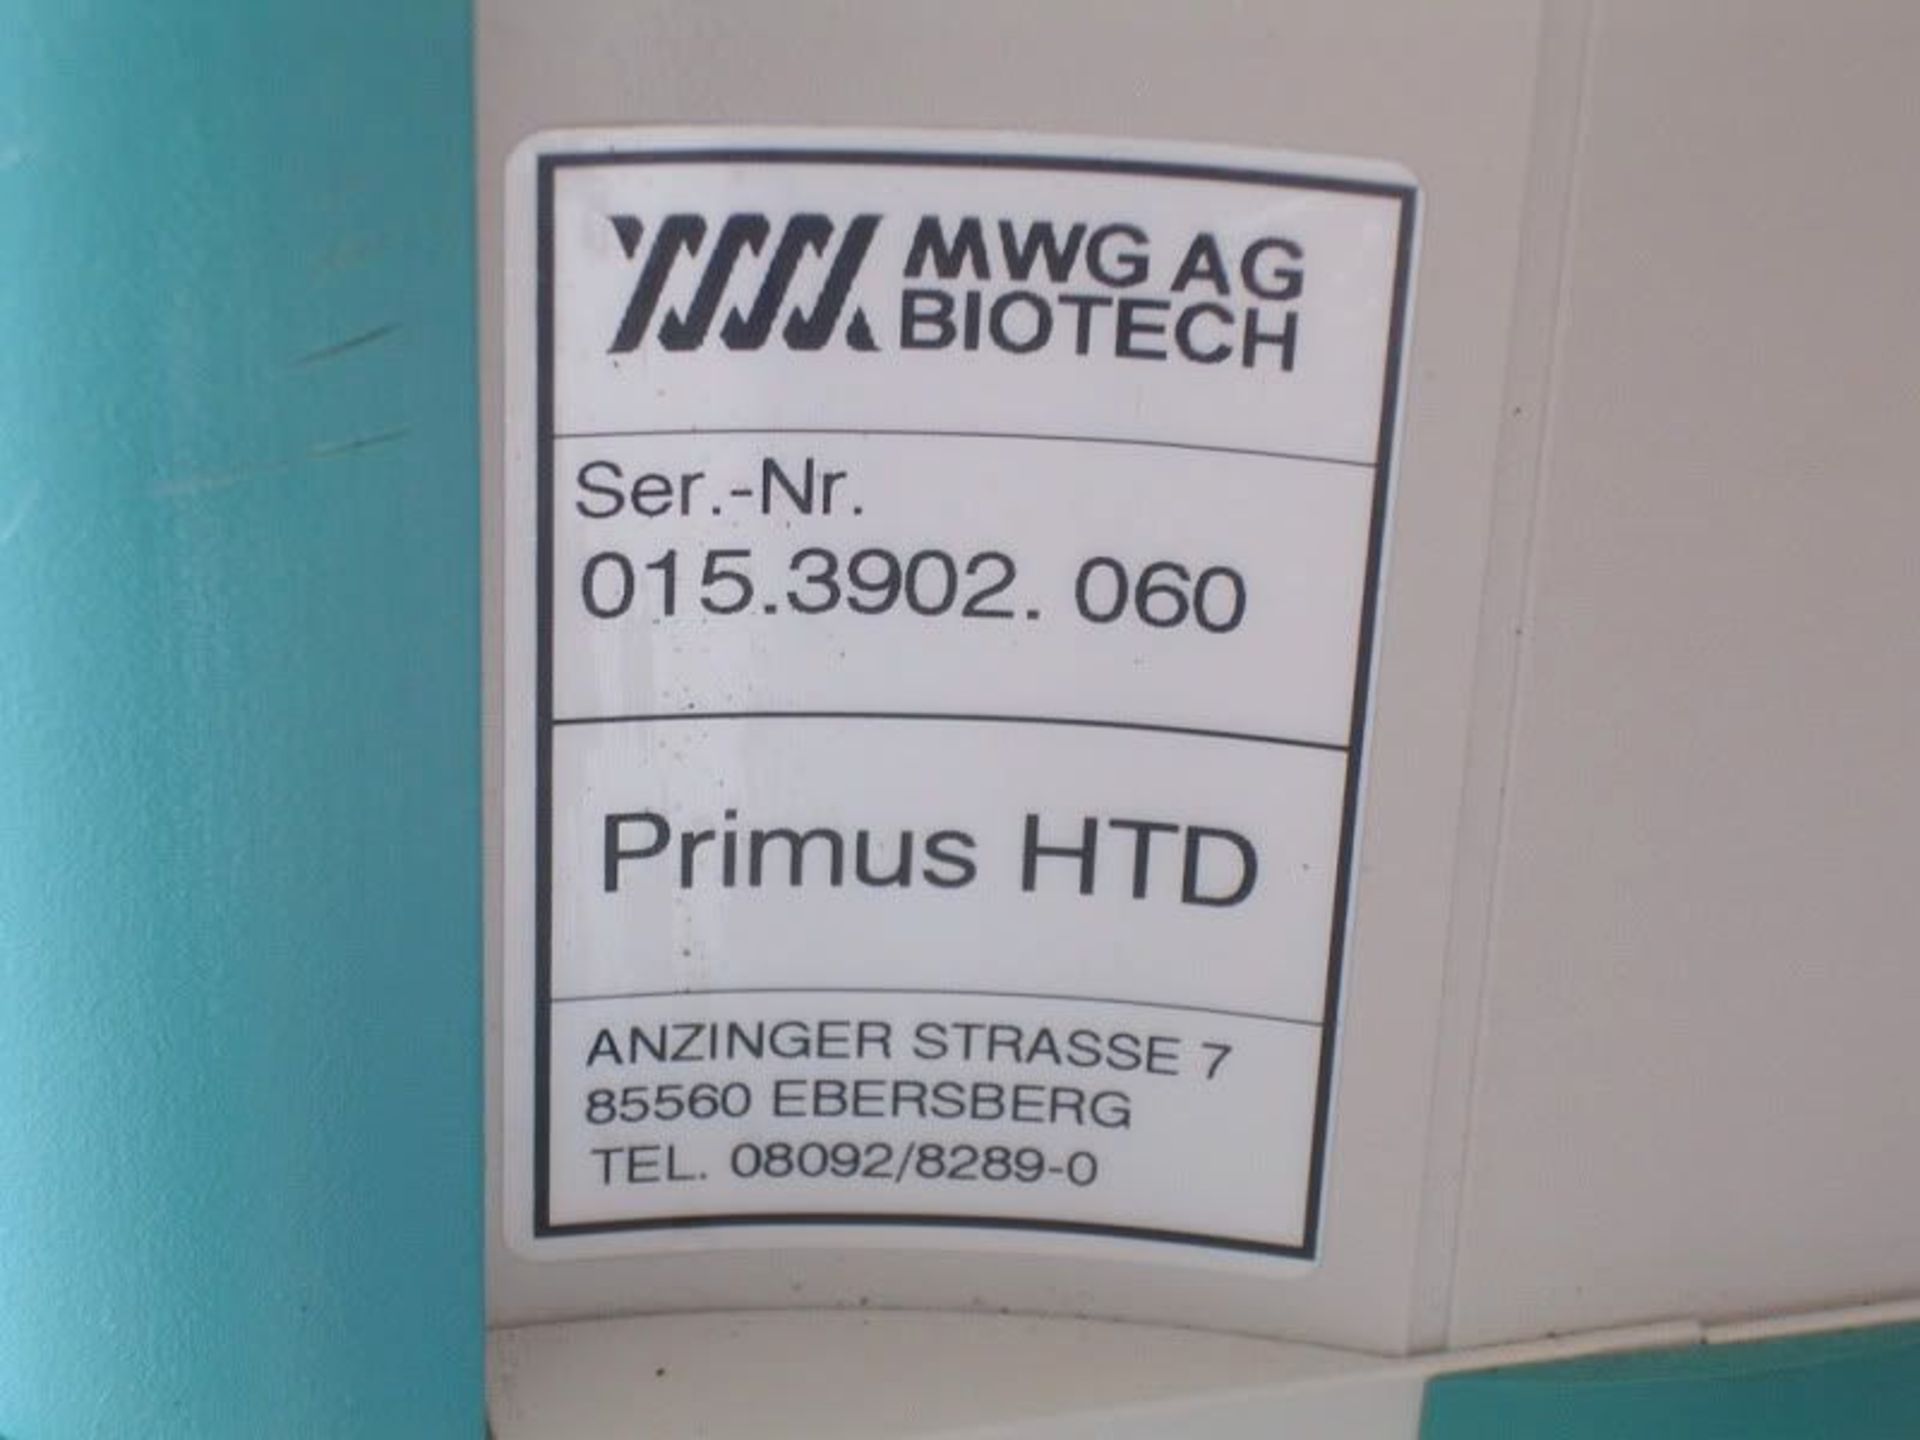 MWG AG Biotech, Primus HT Dual Thermal Cycler HTD PCR, Qty 1, 331261955760 - Image 7 of 8